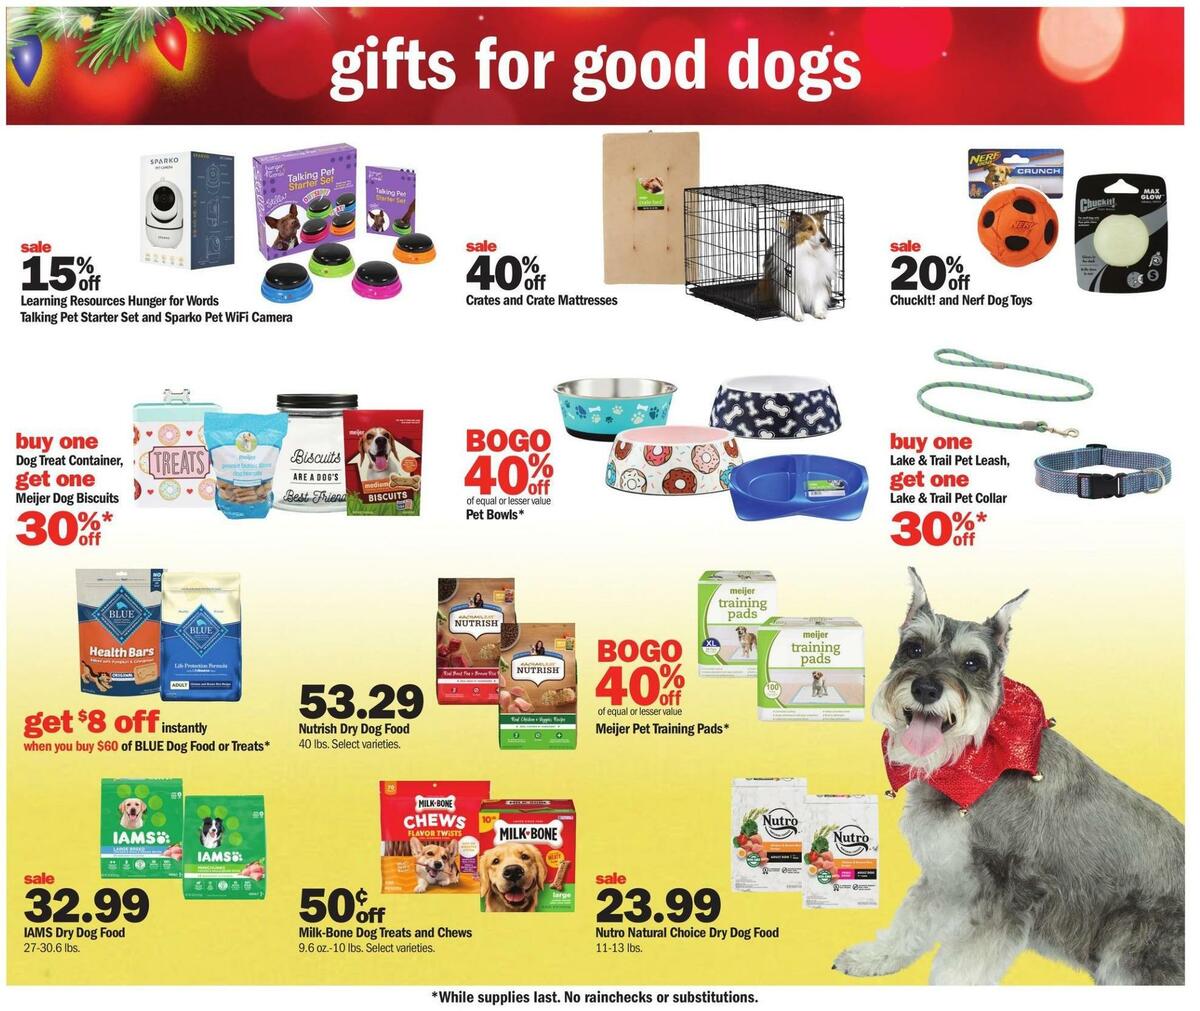 Meijer Pet Ad Weekly Ad from November 6